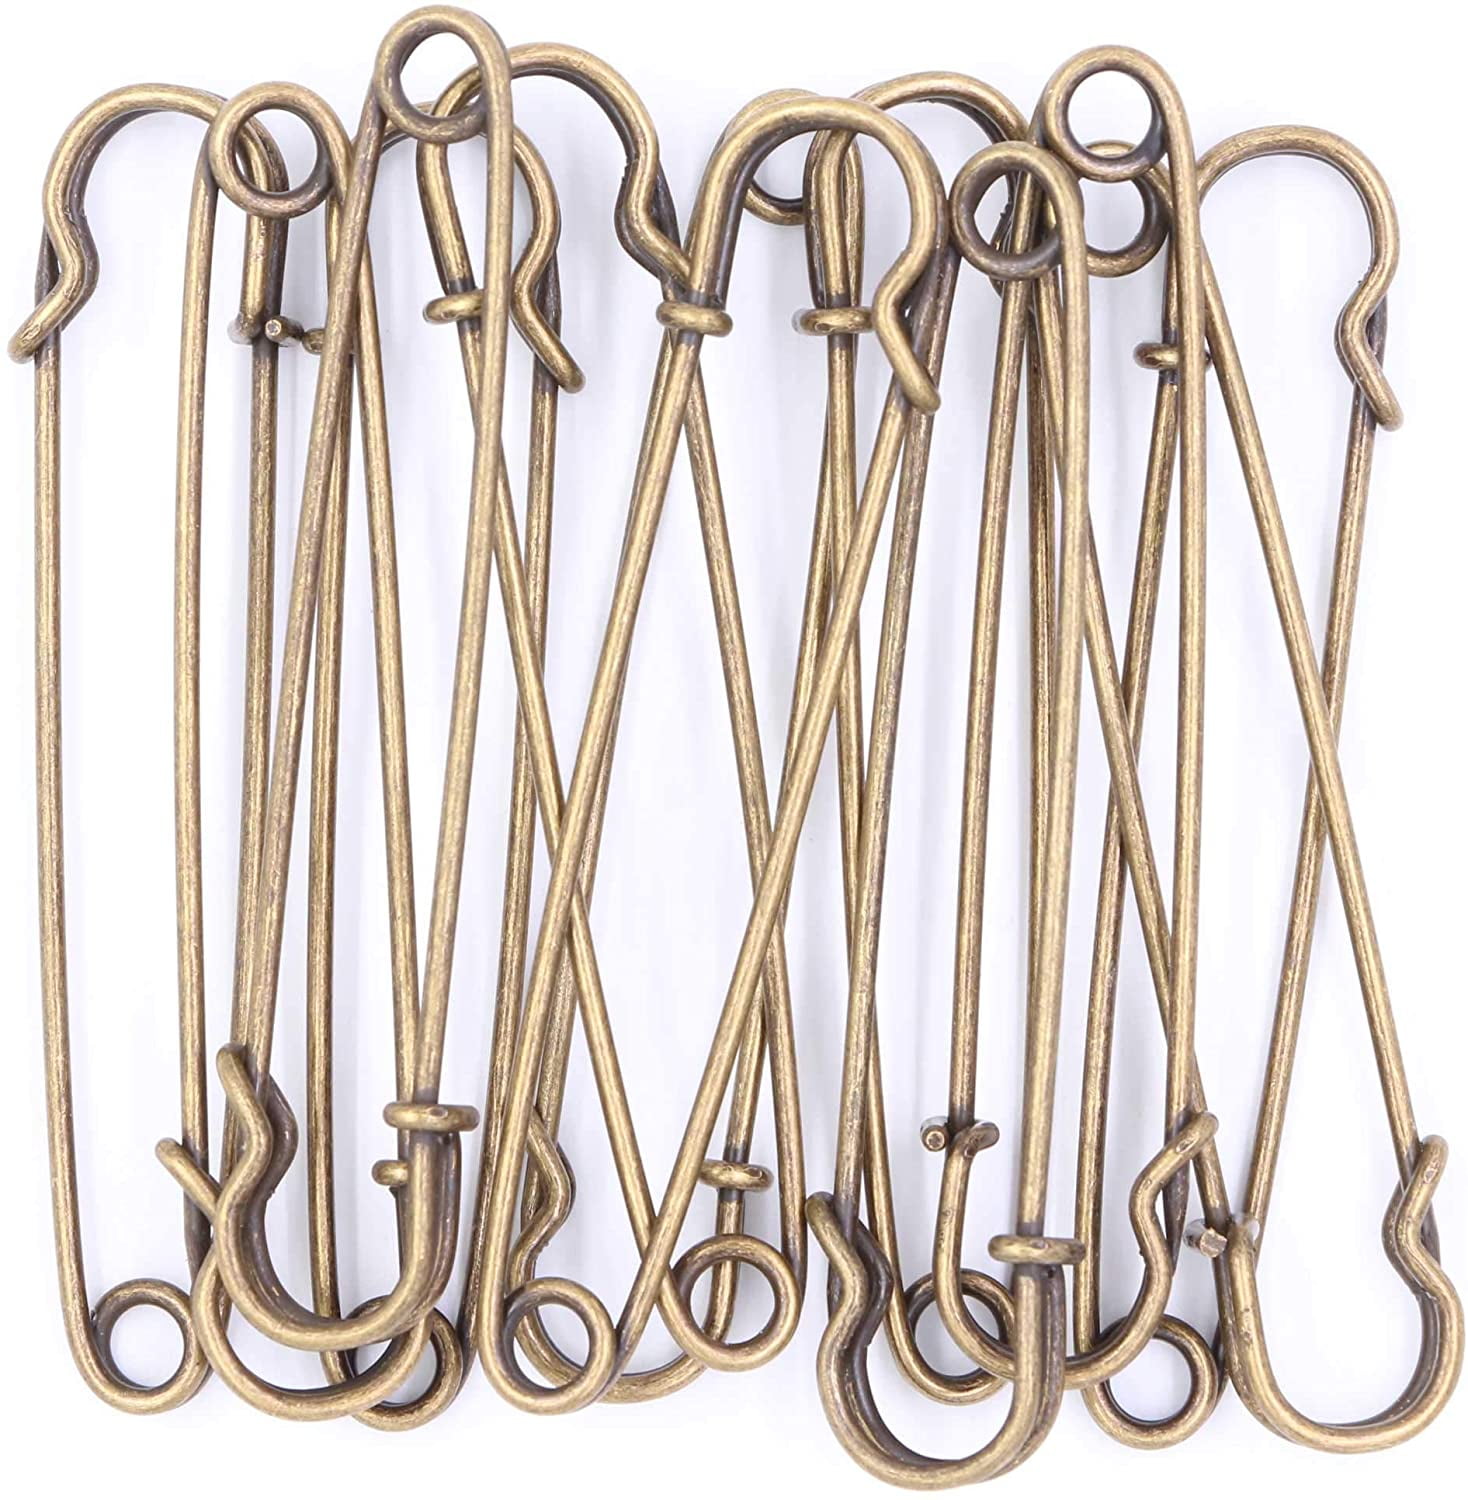 Safety Pins Extra Large Heavy Duty - YiwerDer 22PCS 3Inch Blanket Pins,  Strong & Sturdy Bulk Pins for Blankets, Skirts, Crafts, Kilts - Silver